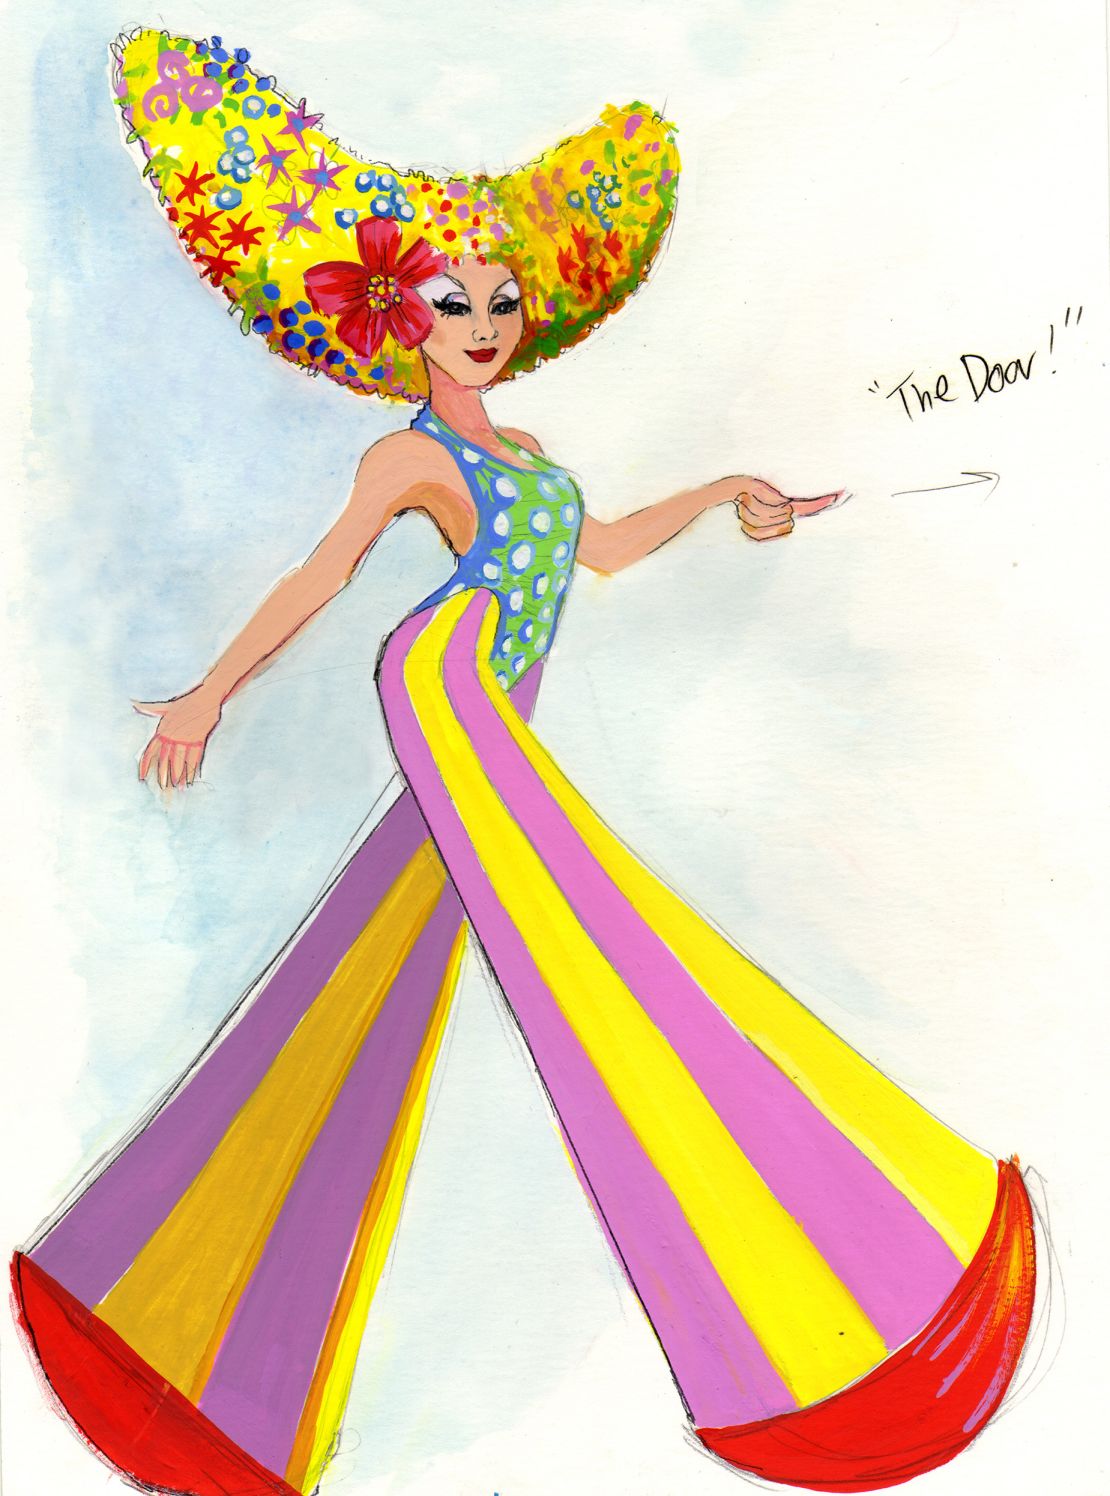 Tim Chappel's costume sketch shows the origins of the floral headpieces and flat-bottomed outfit worn by the principal trio during their performance of "I Will Survive".